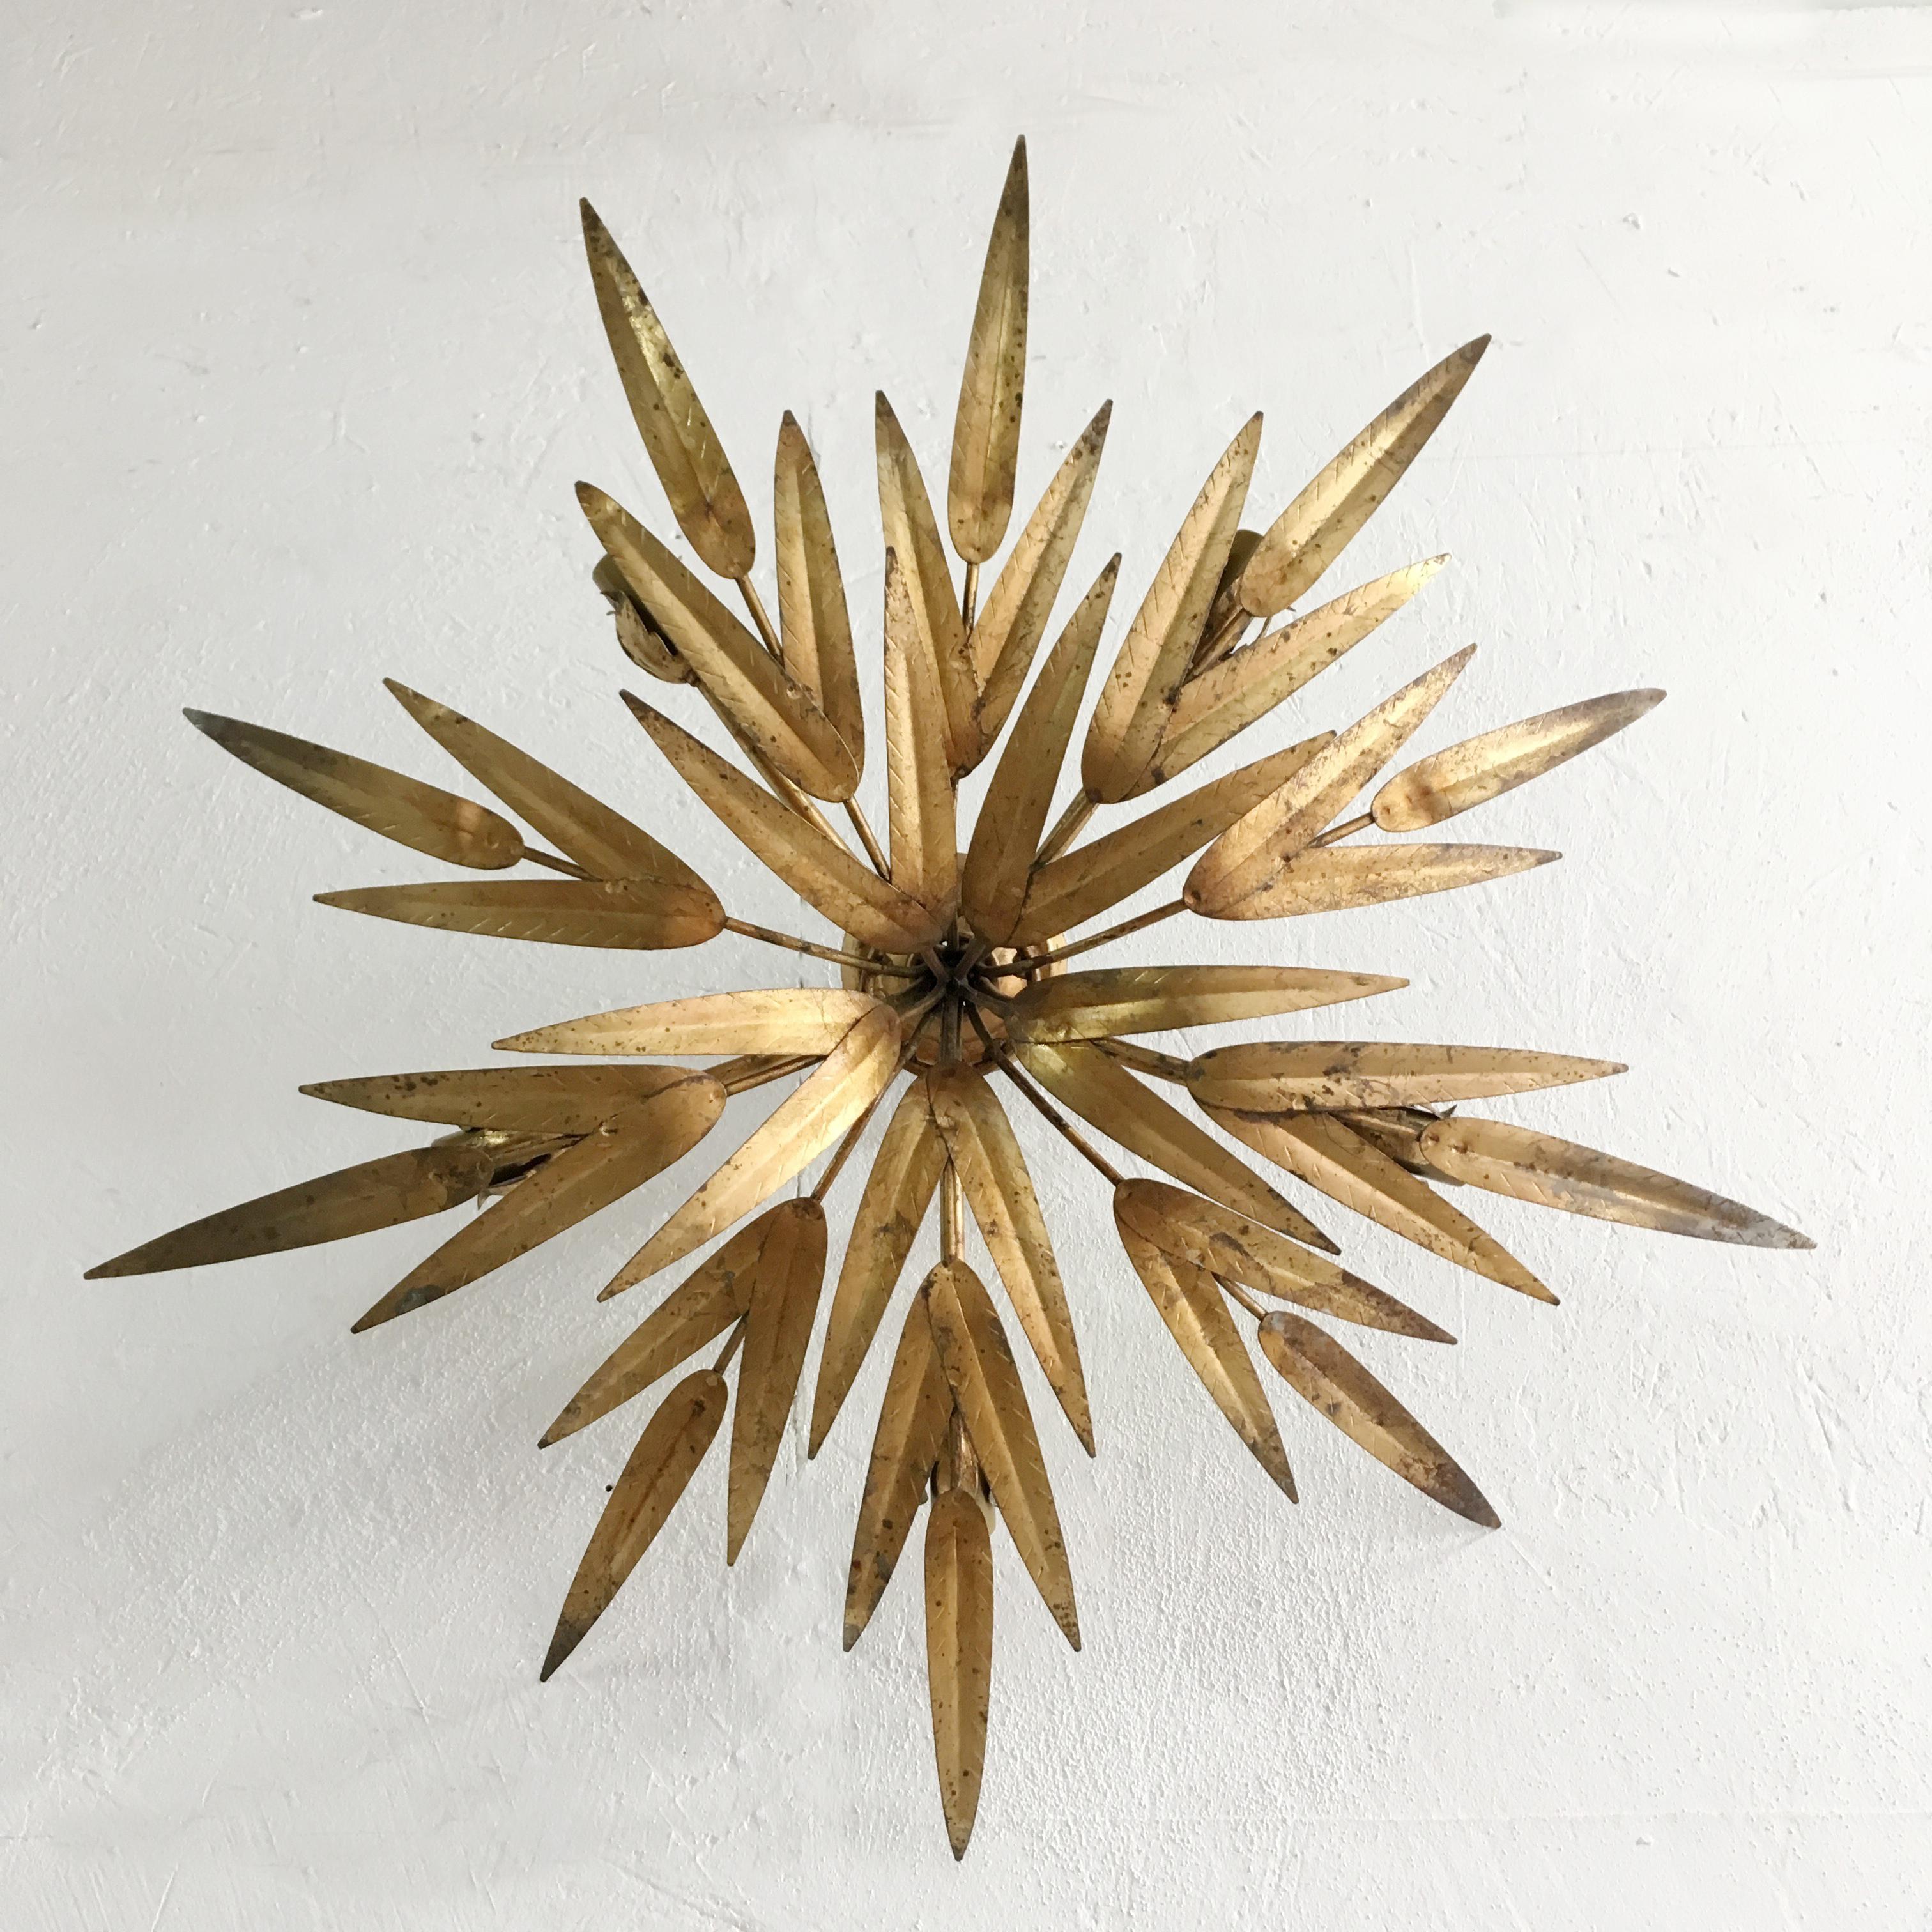 Spanish palm leaf flush ceiling light
Attributed to 'Ferro' Spain
circa 1950s
The light has a fixed ceiling rose so the lamp sits close to the ceiling
The gold leaf covered metal leaves reach out in 10 branches
Behind the branches of palm